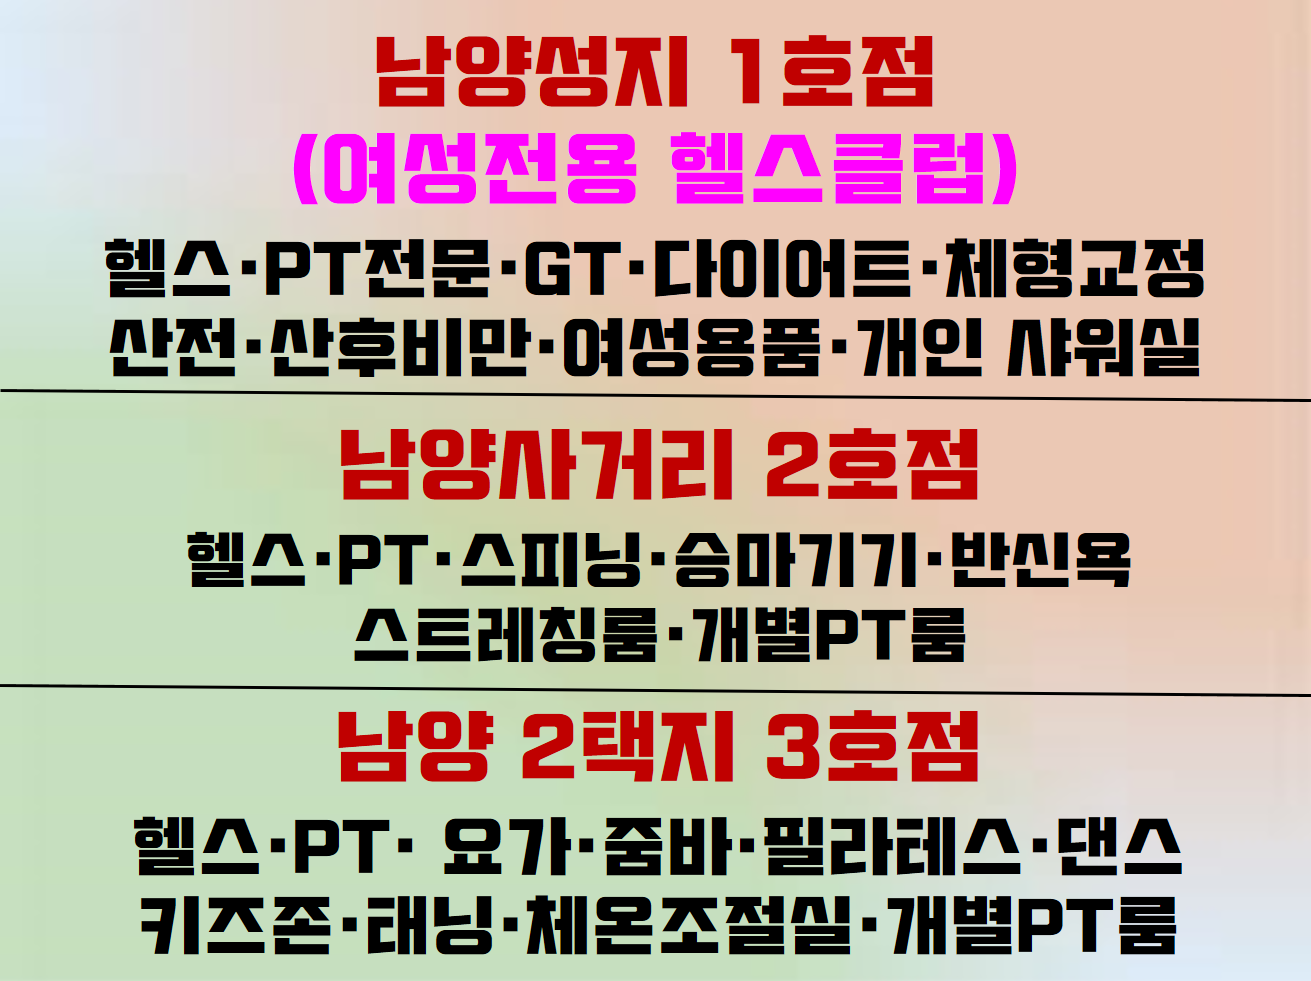 http://stronggym.itpage.kr/user/s/stronggym/editor/1806/f99f8f0766ec1774af5acc8f6e5a0295_1530003422_8522.png 이미지크게보기